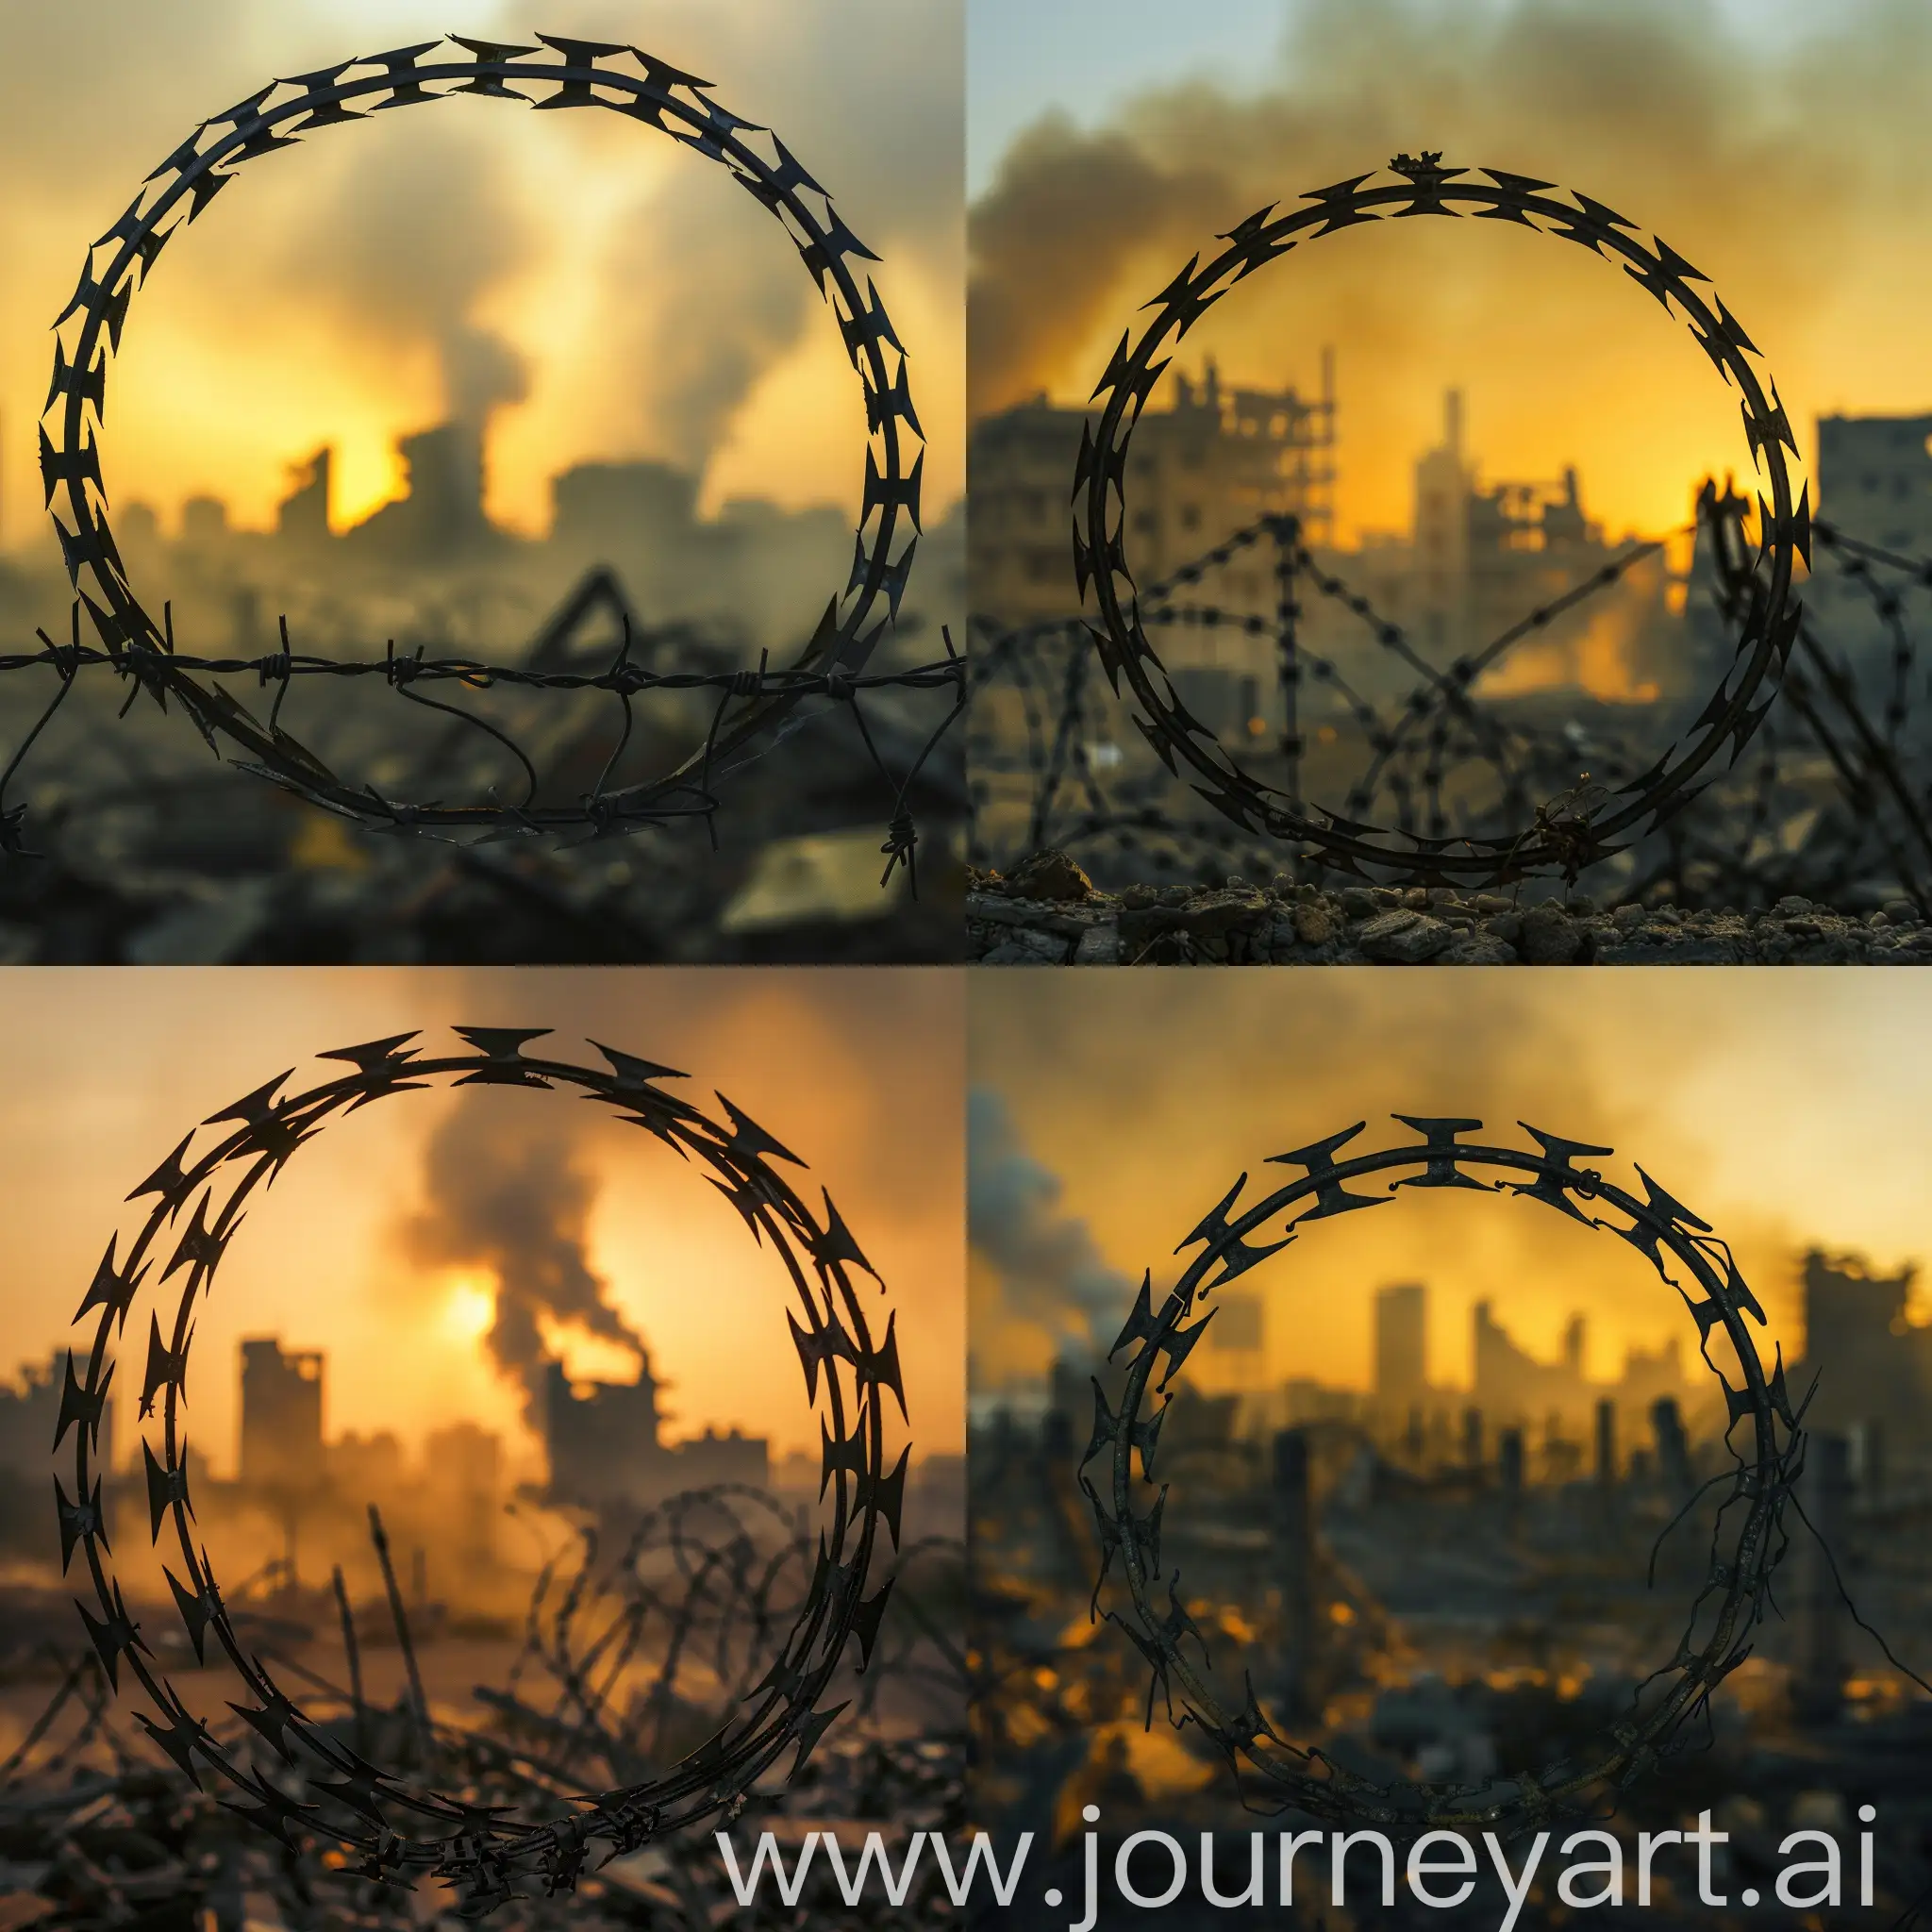 Circular-Razor-Barbed-Wire-Fence-Against-Destroyed-City-at-Dawn